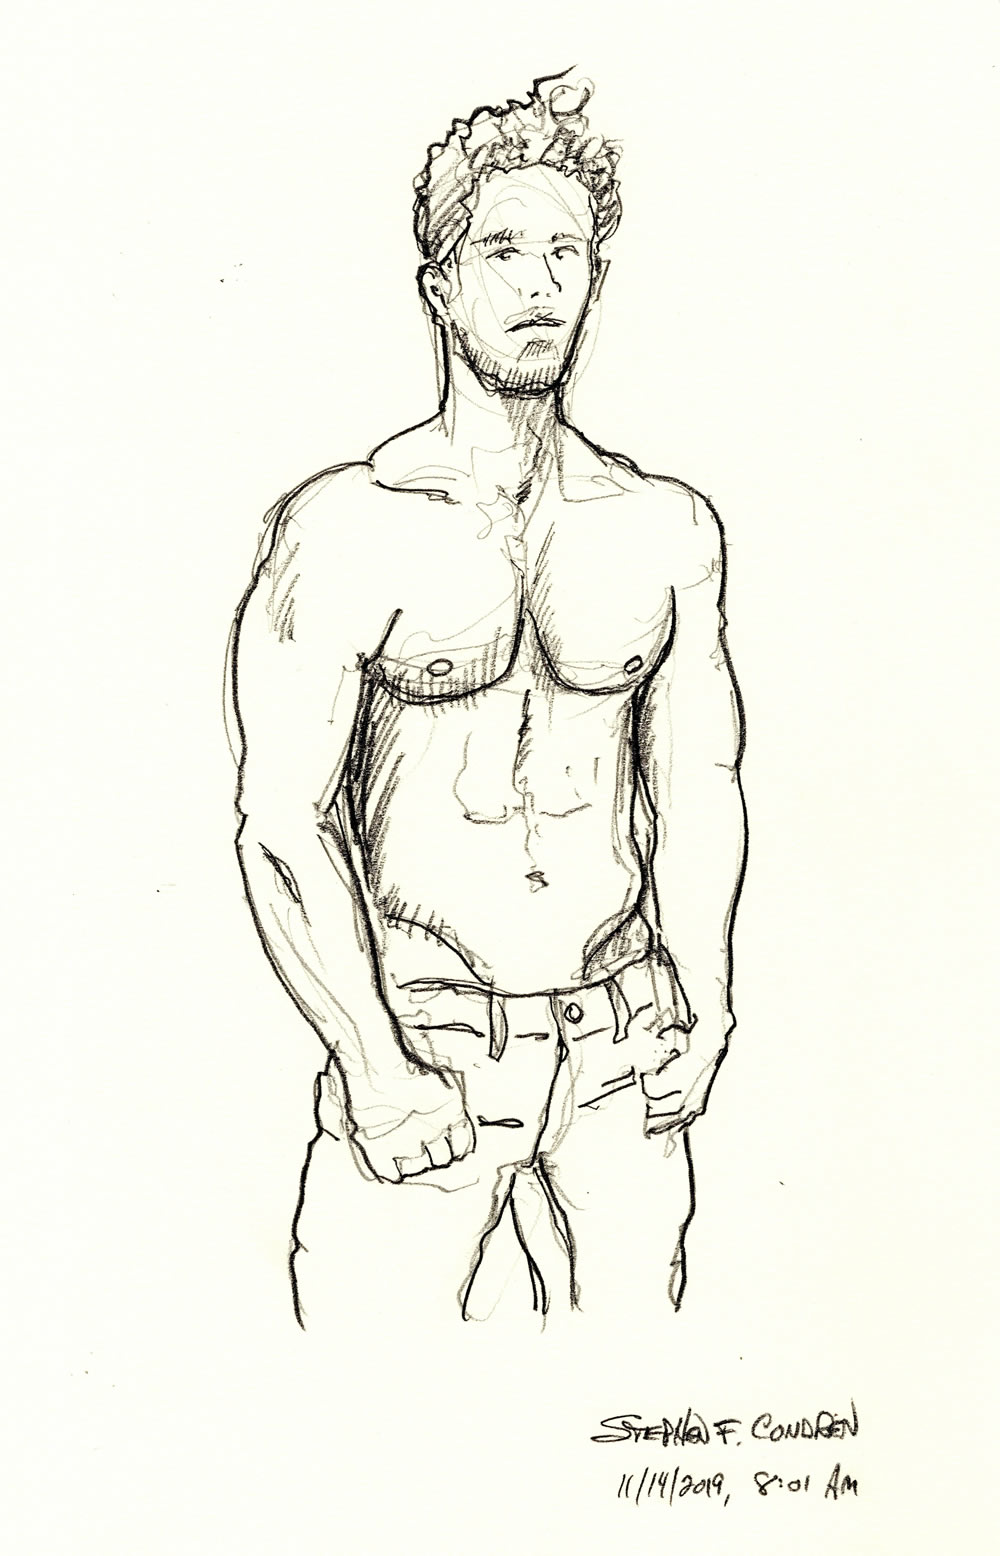 Pencil figure drawing of very hot and fit shirtless male. He has the physique of a gymnast, and he is very buff and hot.